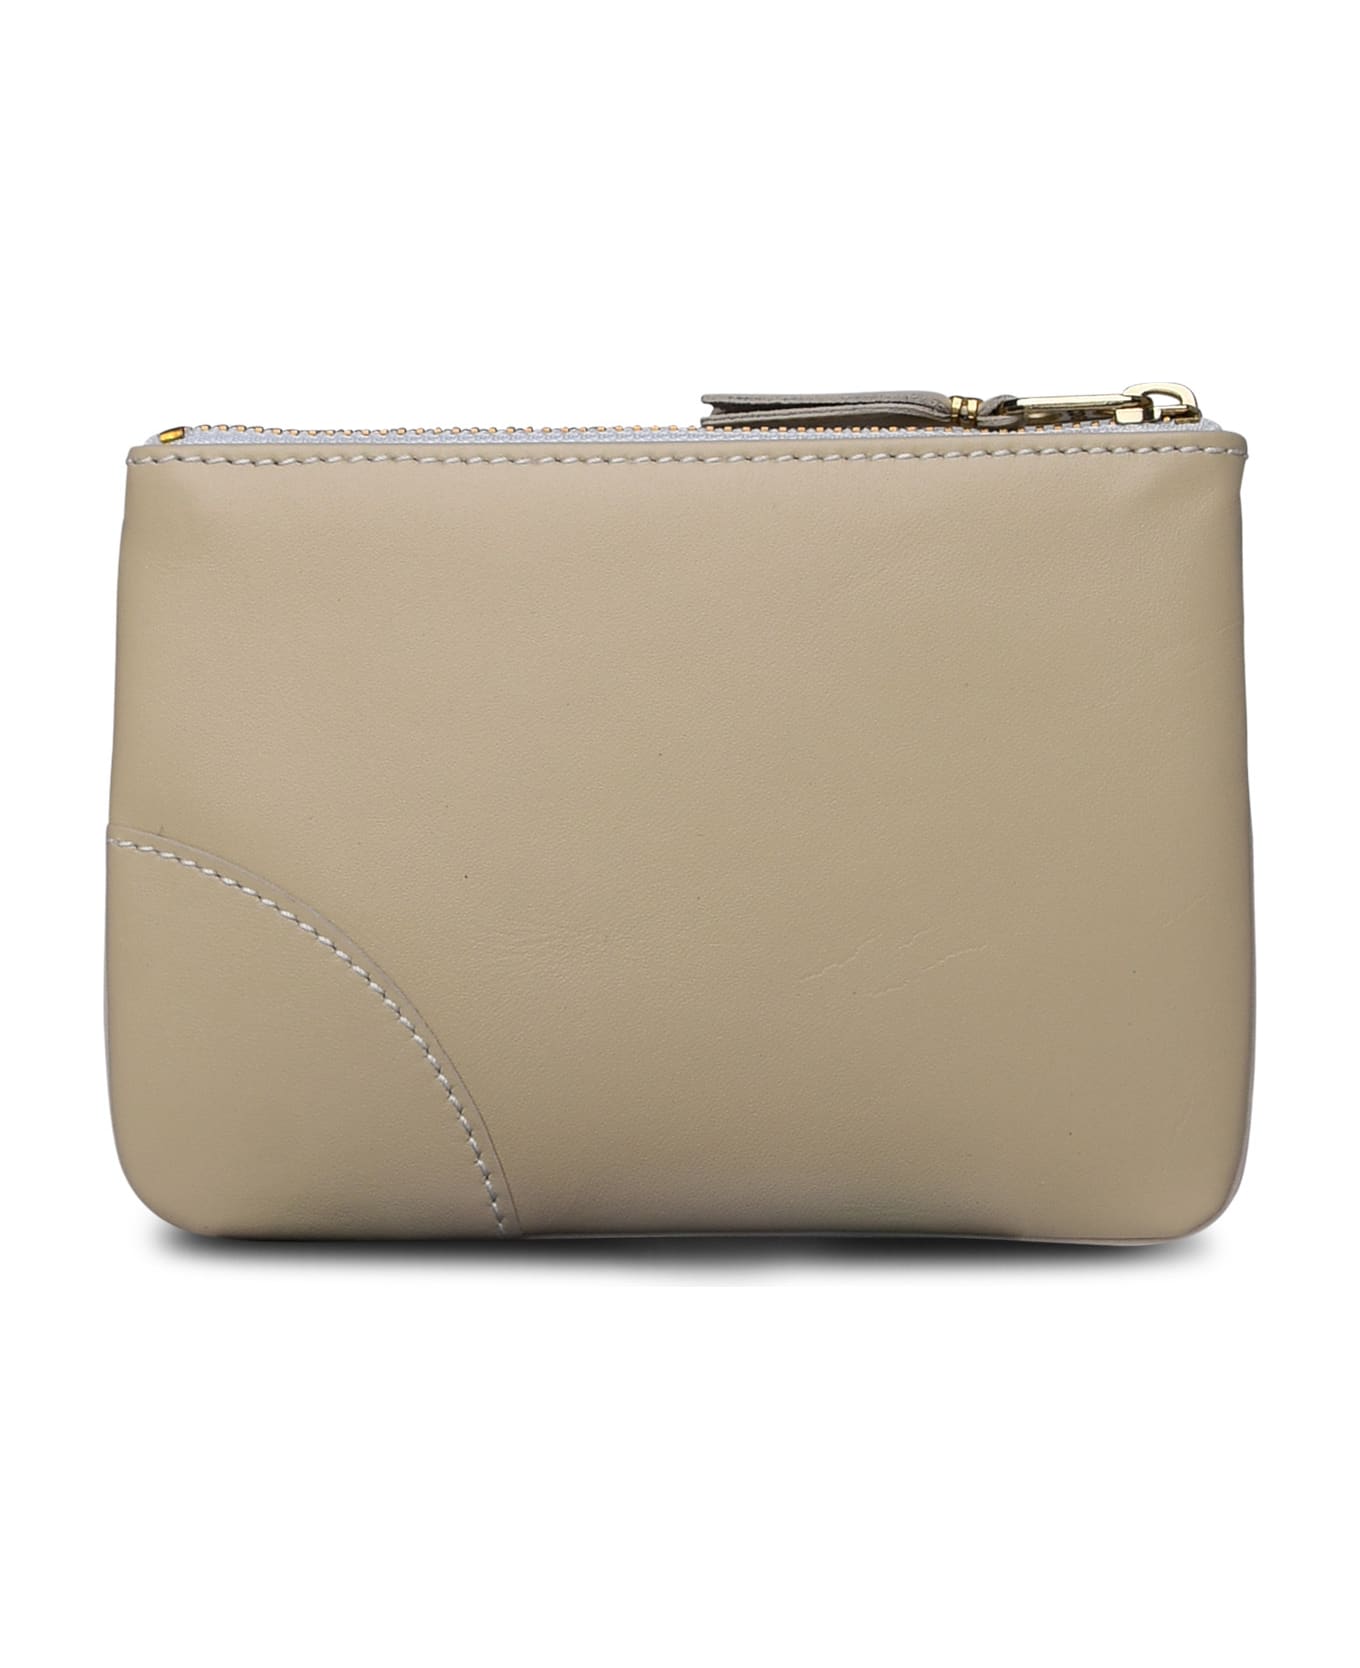 Comme des Garçons Wallet Small Leather Flat Bag - Ivory クラッチバッグ